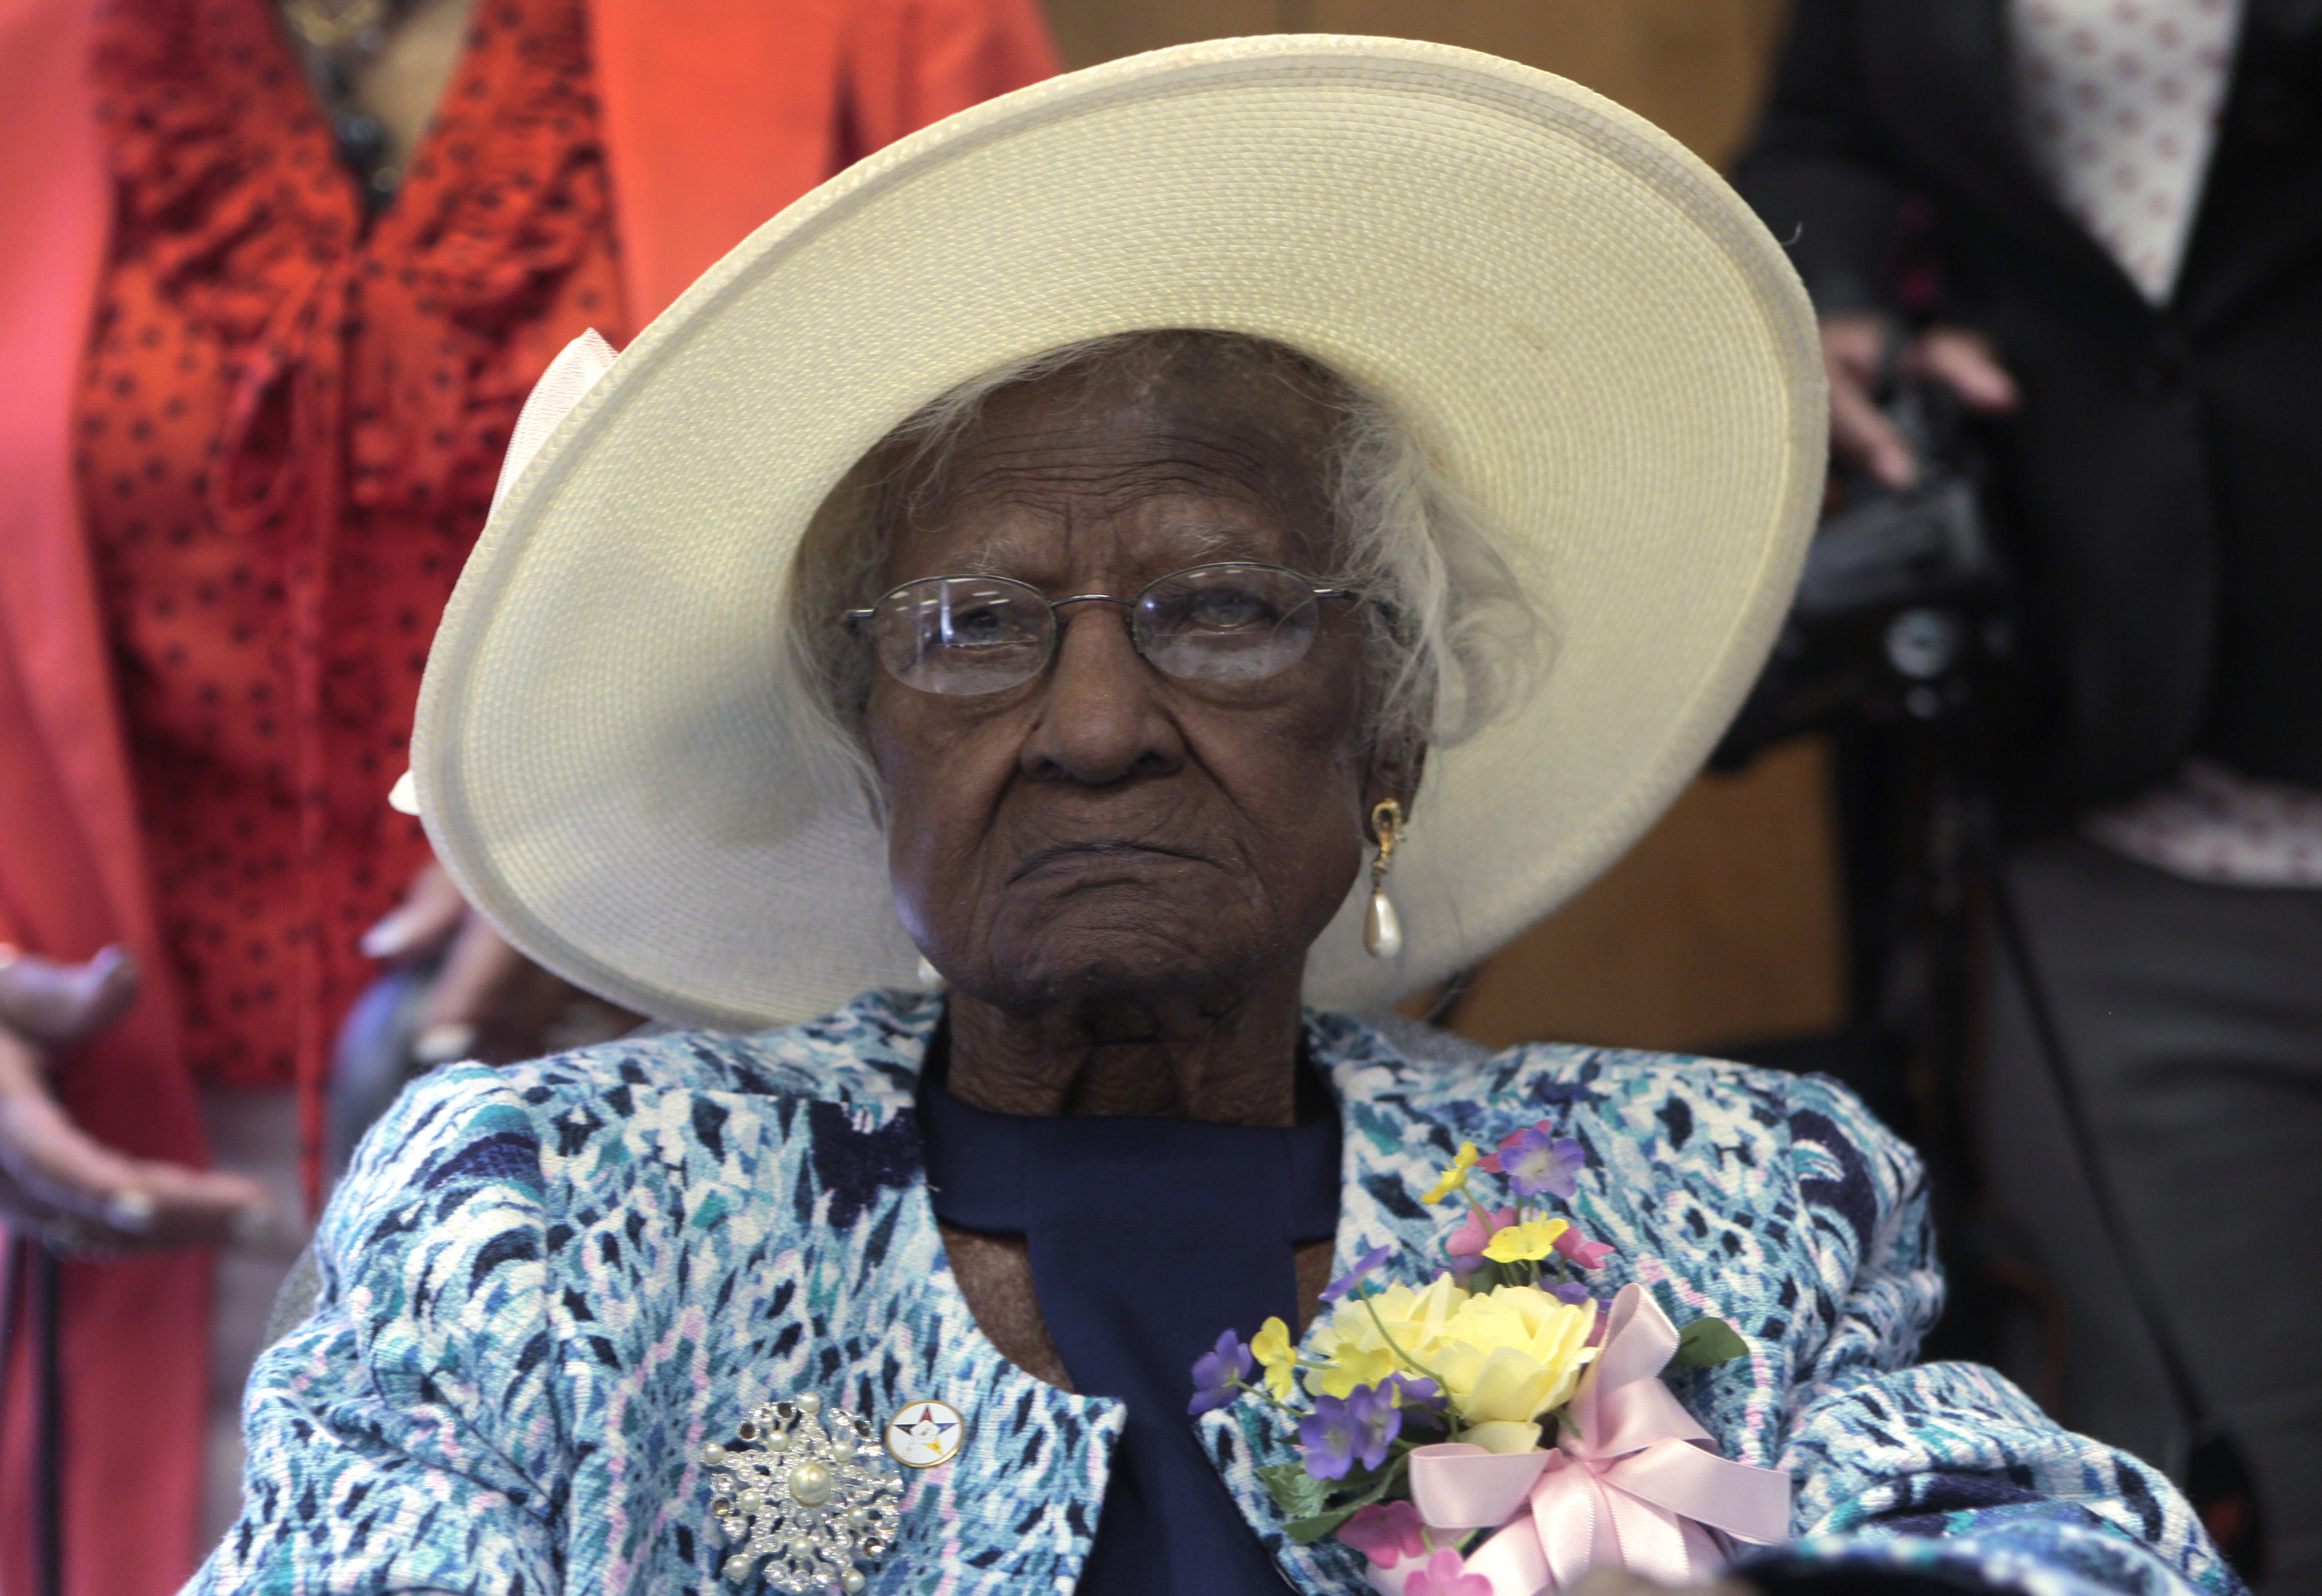 jeralean-talley-the-oldest-american-alive-turns-115-years-what-s-the-secret-of-her-long-life.jpg